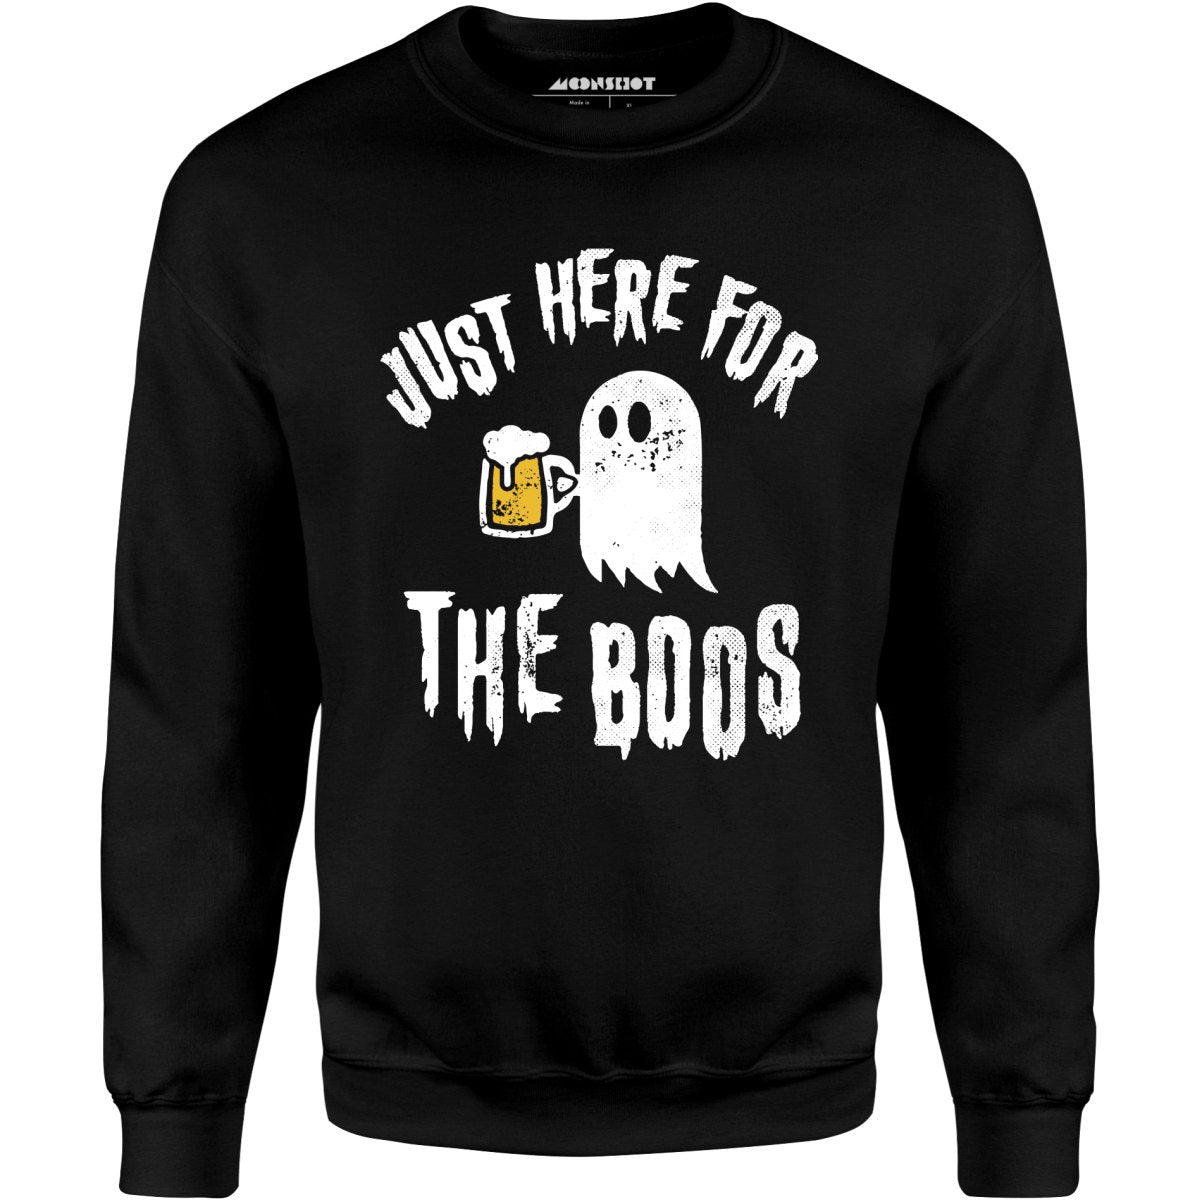 Just Here for the Boos - Unisex Sweatshirt